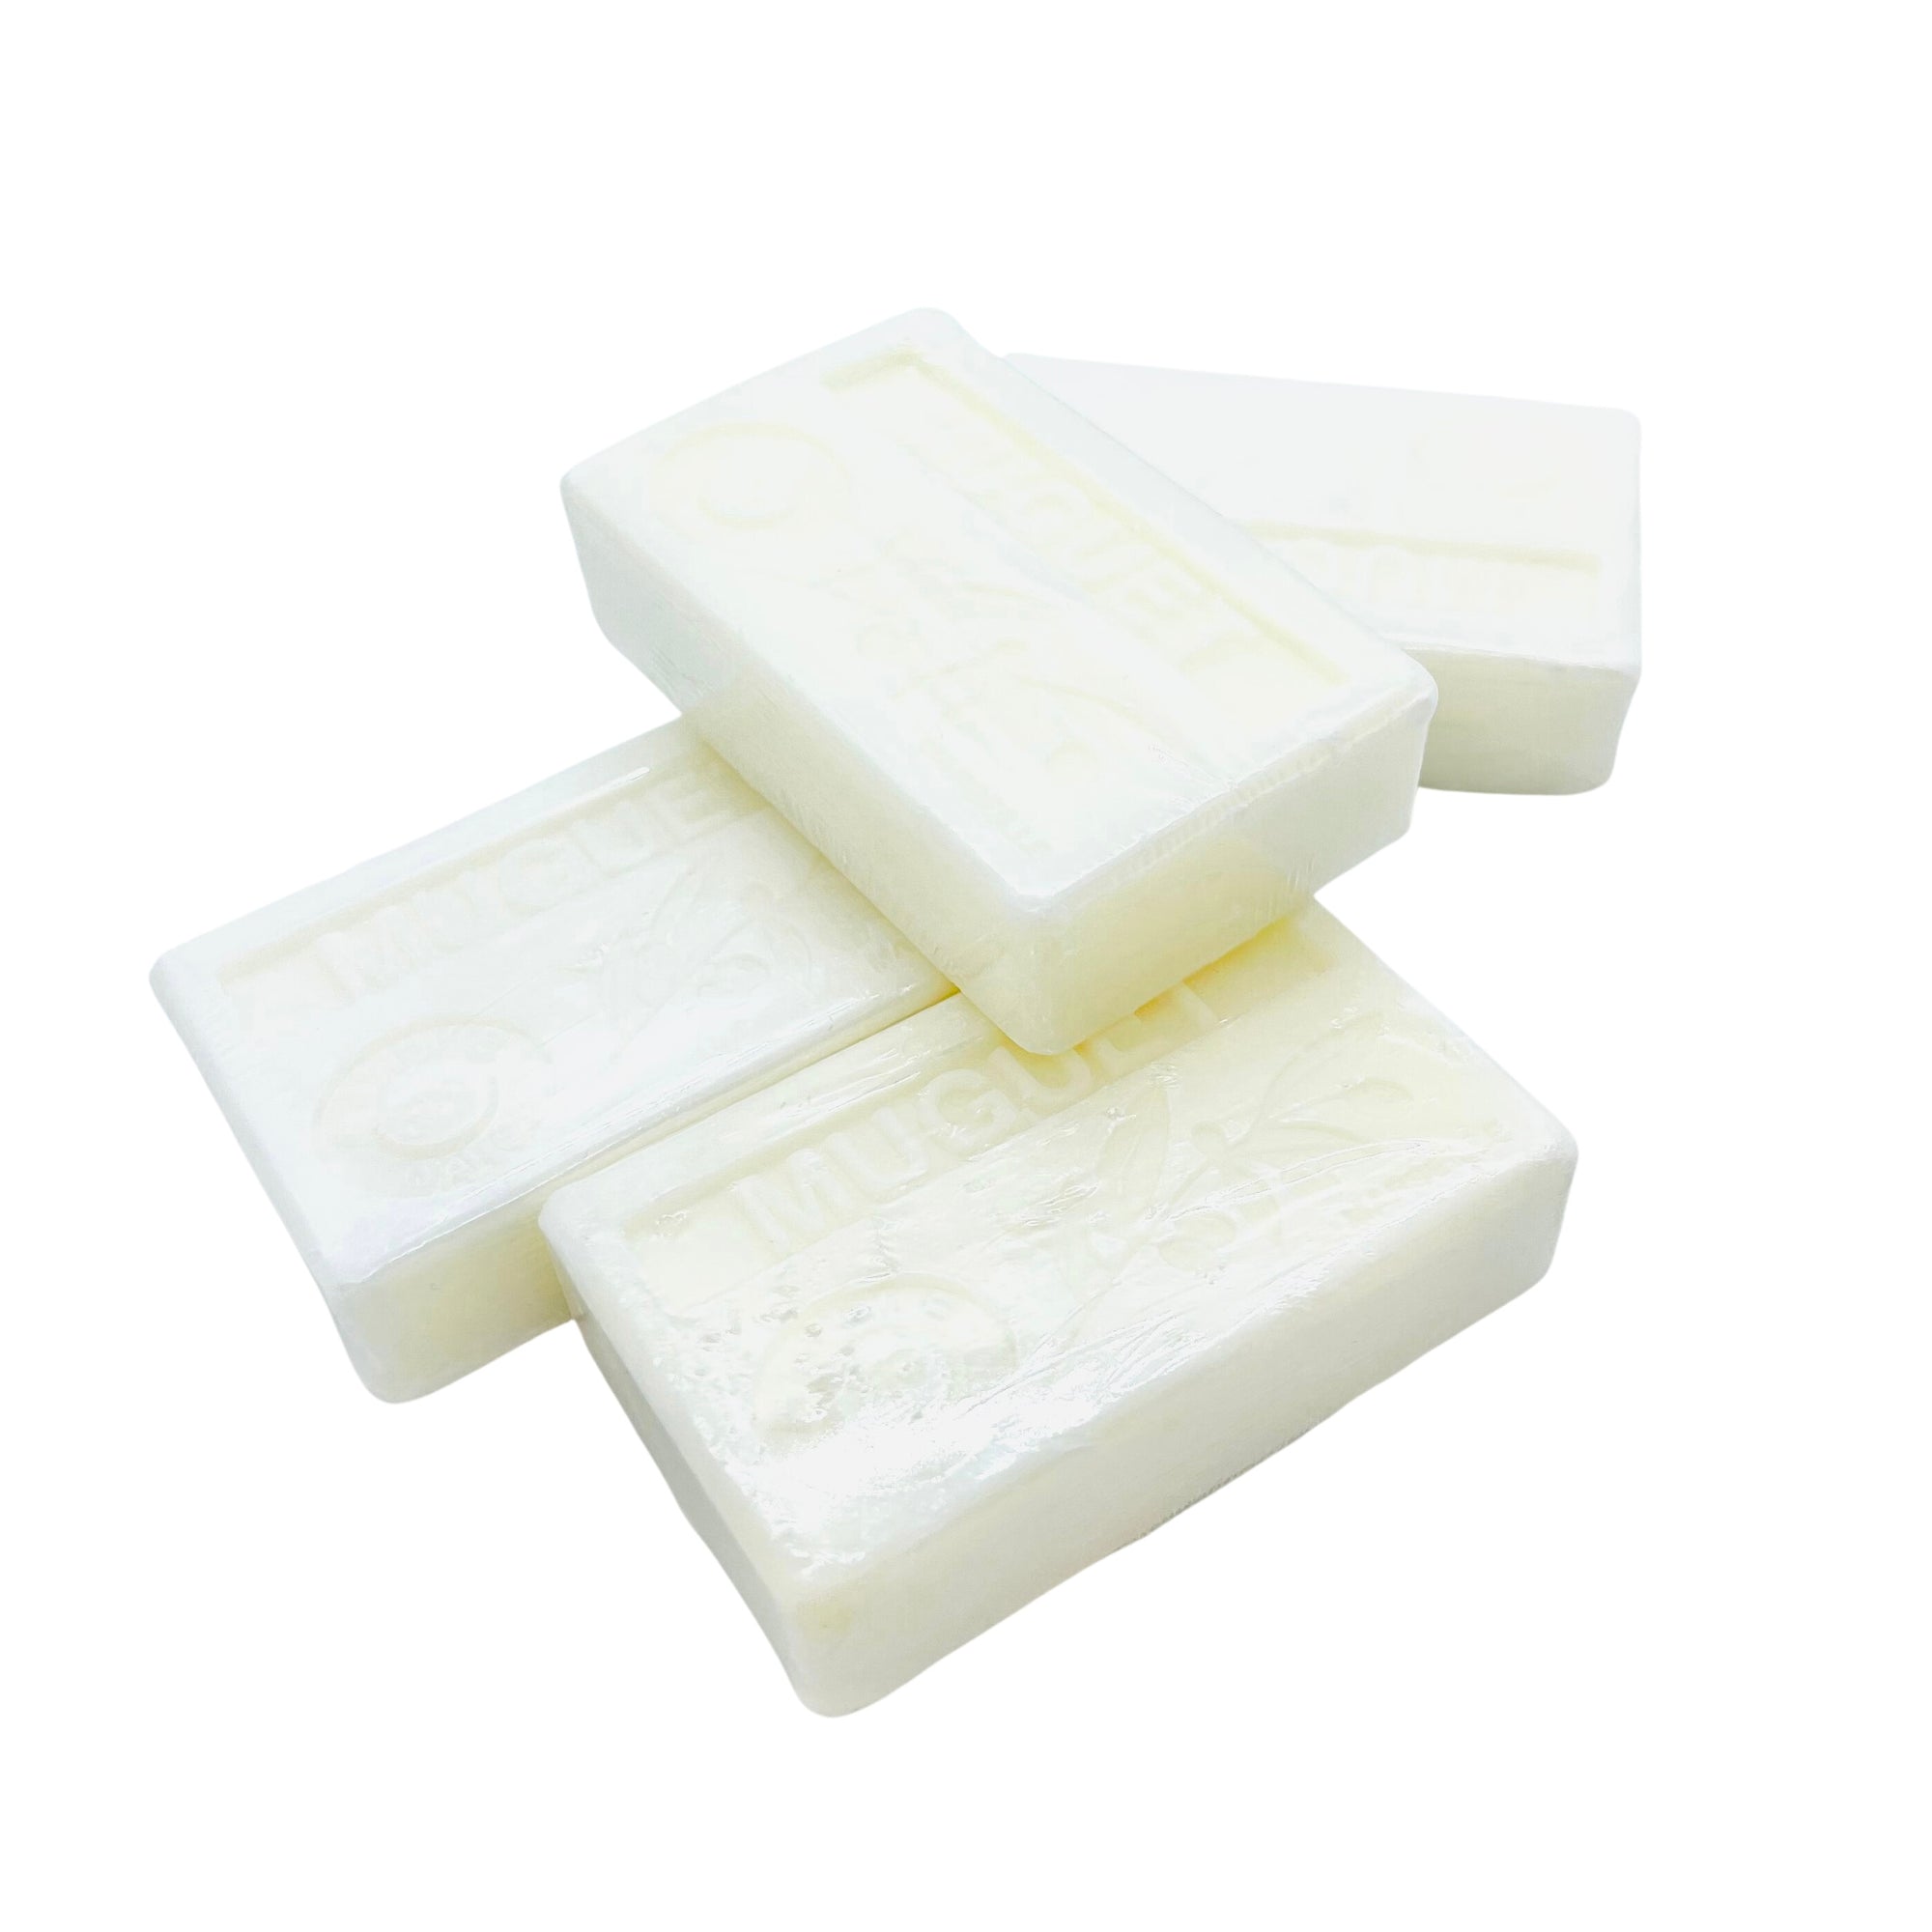 A rectangular bar of white French soap to accompany the bubble soap dish.